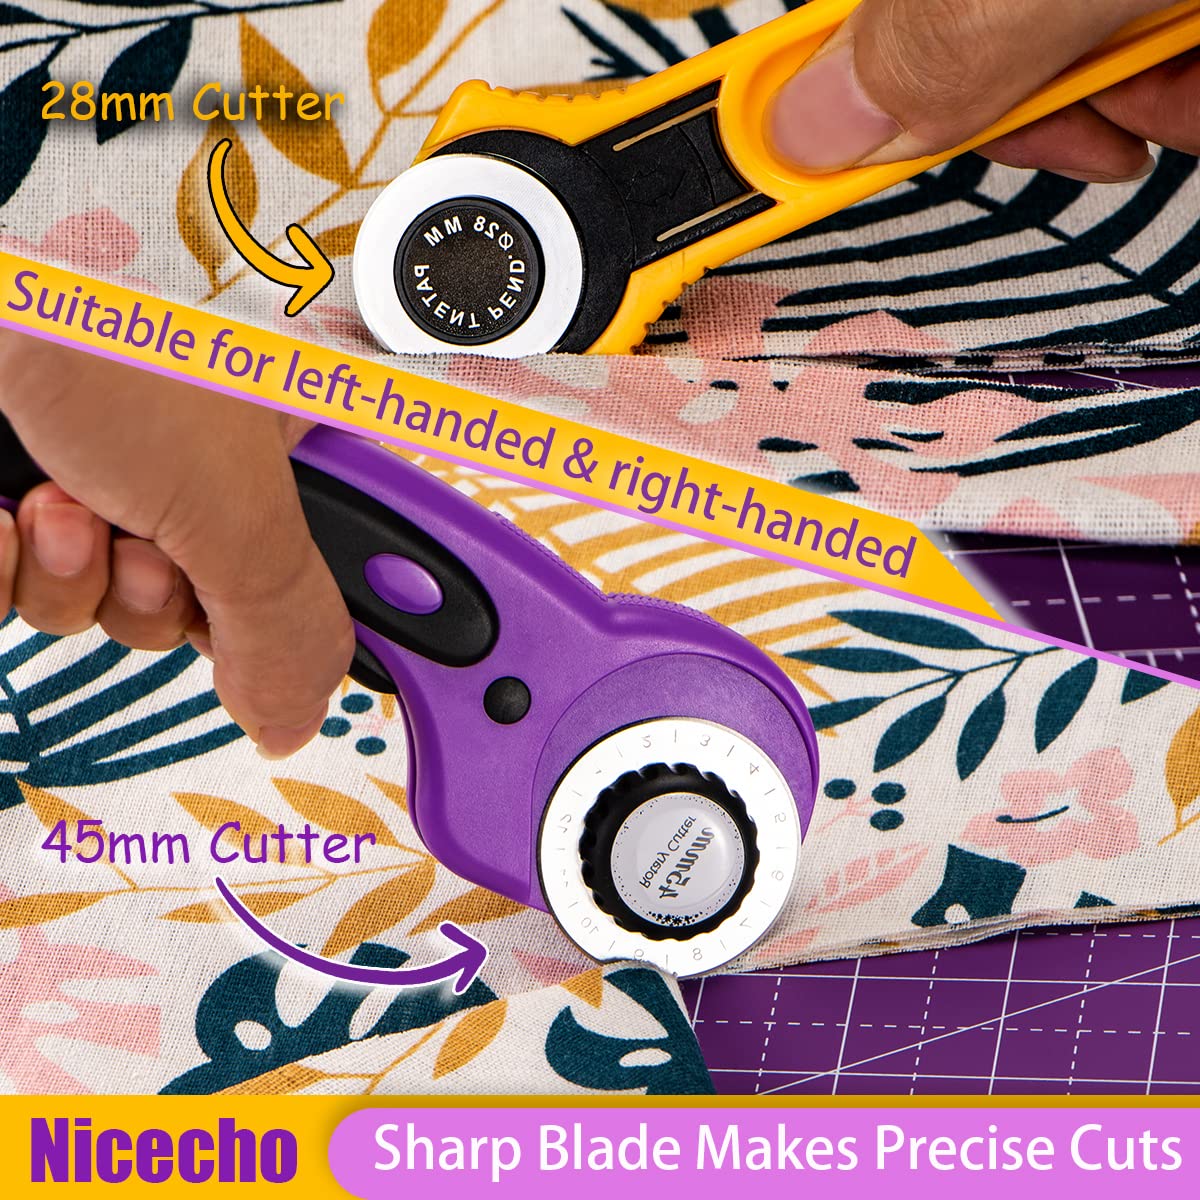 Rotary Cutter Set,Nicecho Sewing Quilting Supplies,45mm & 28 mm Fabric Cutters,8 Rotary Cutter Blades,A3 Cutting Mat for Sewing,6x12 & 2.5x12 In